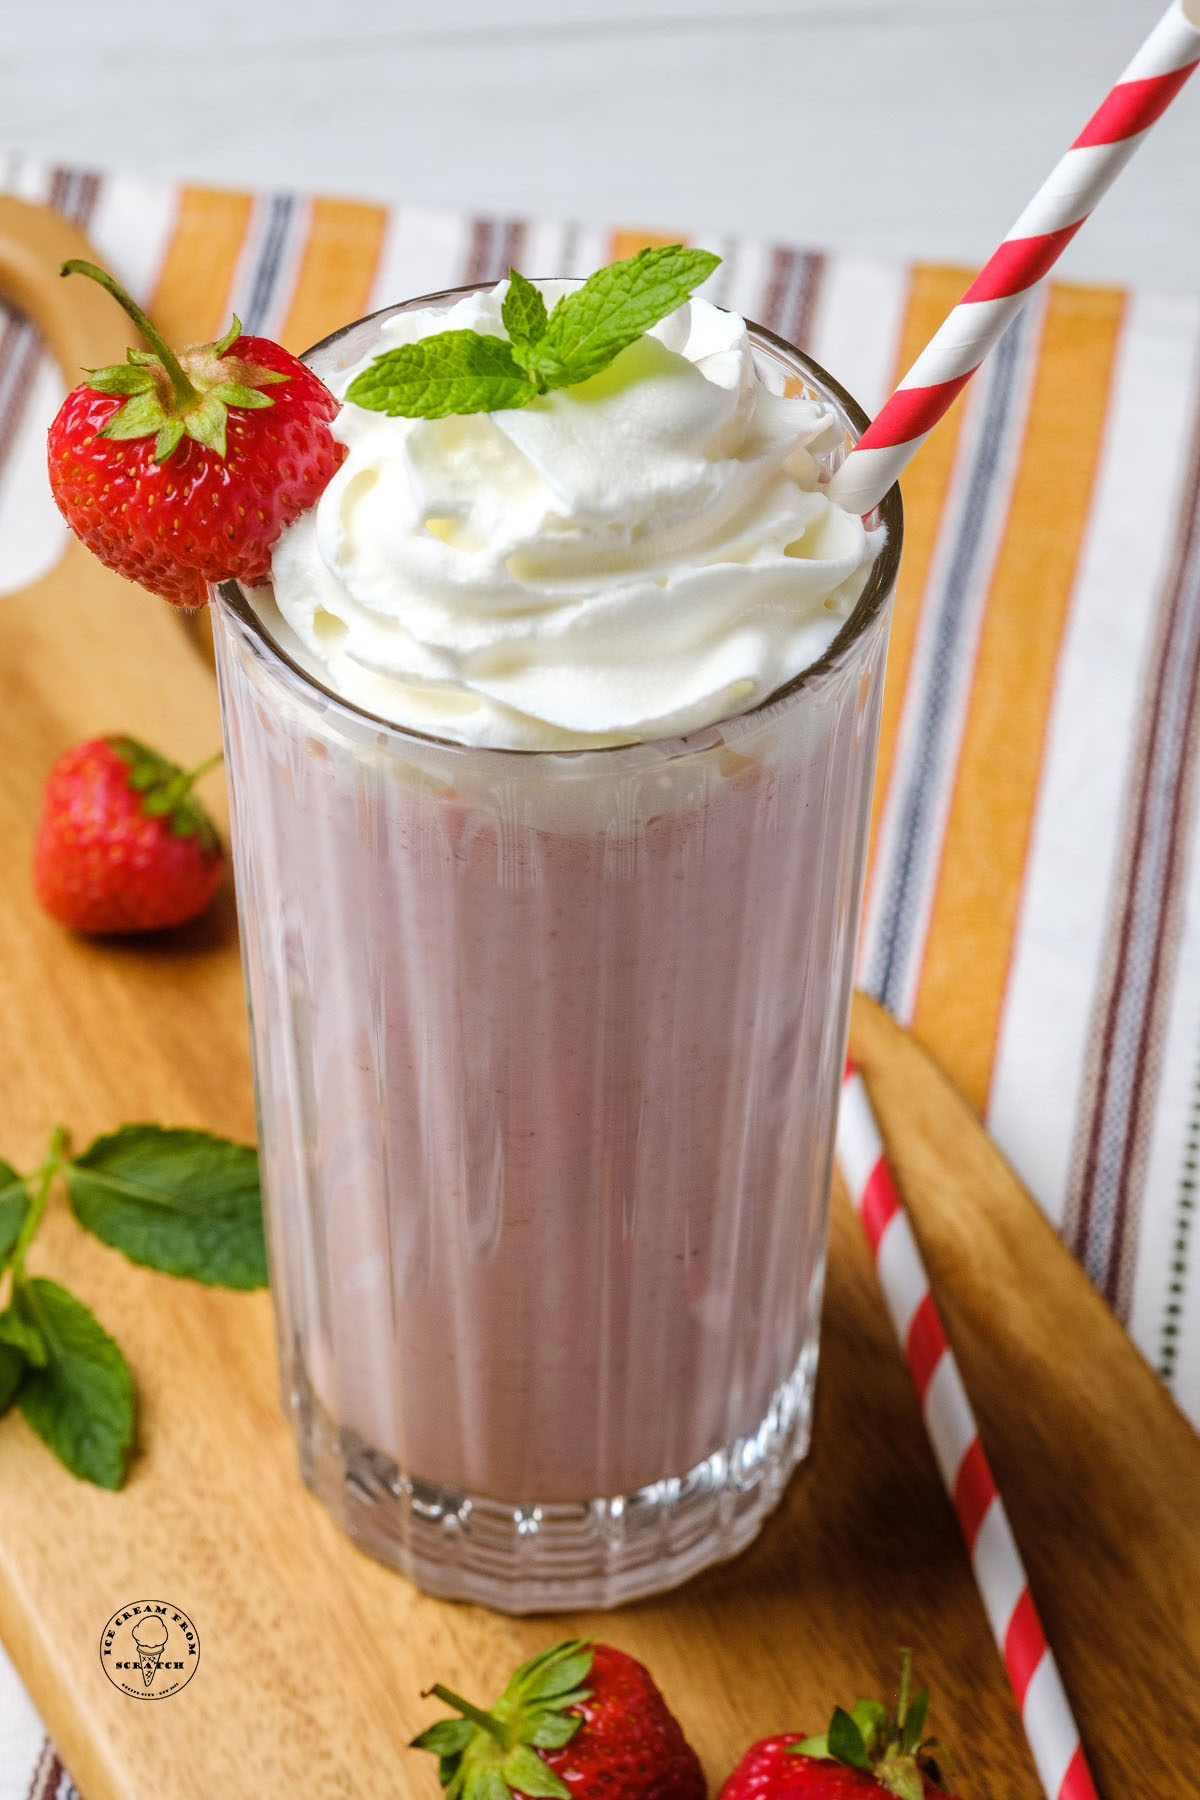 a ridged clear glass filled with strawberry milkshake, garnished with whipped ream, mint, strawberries, and a red and white straw.